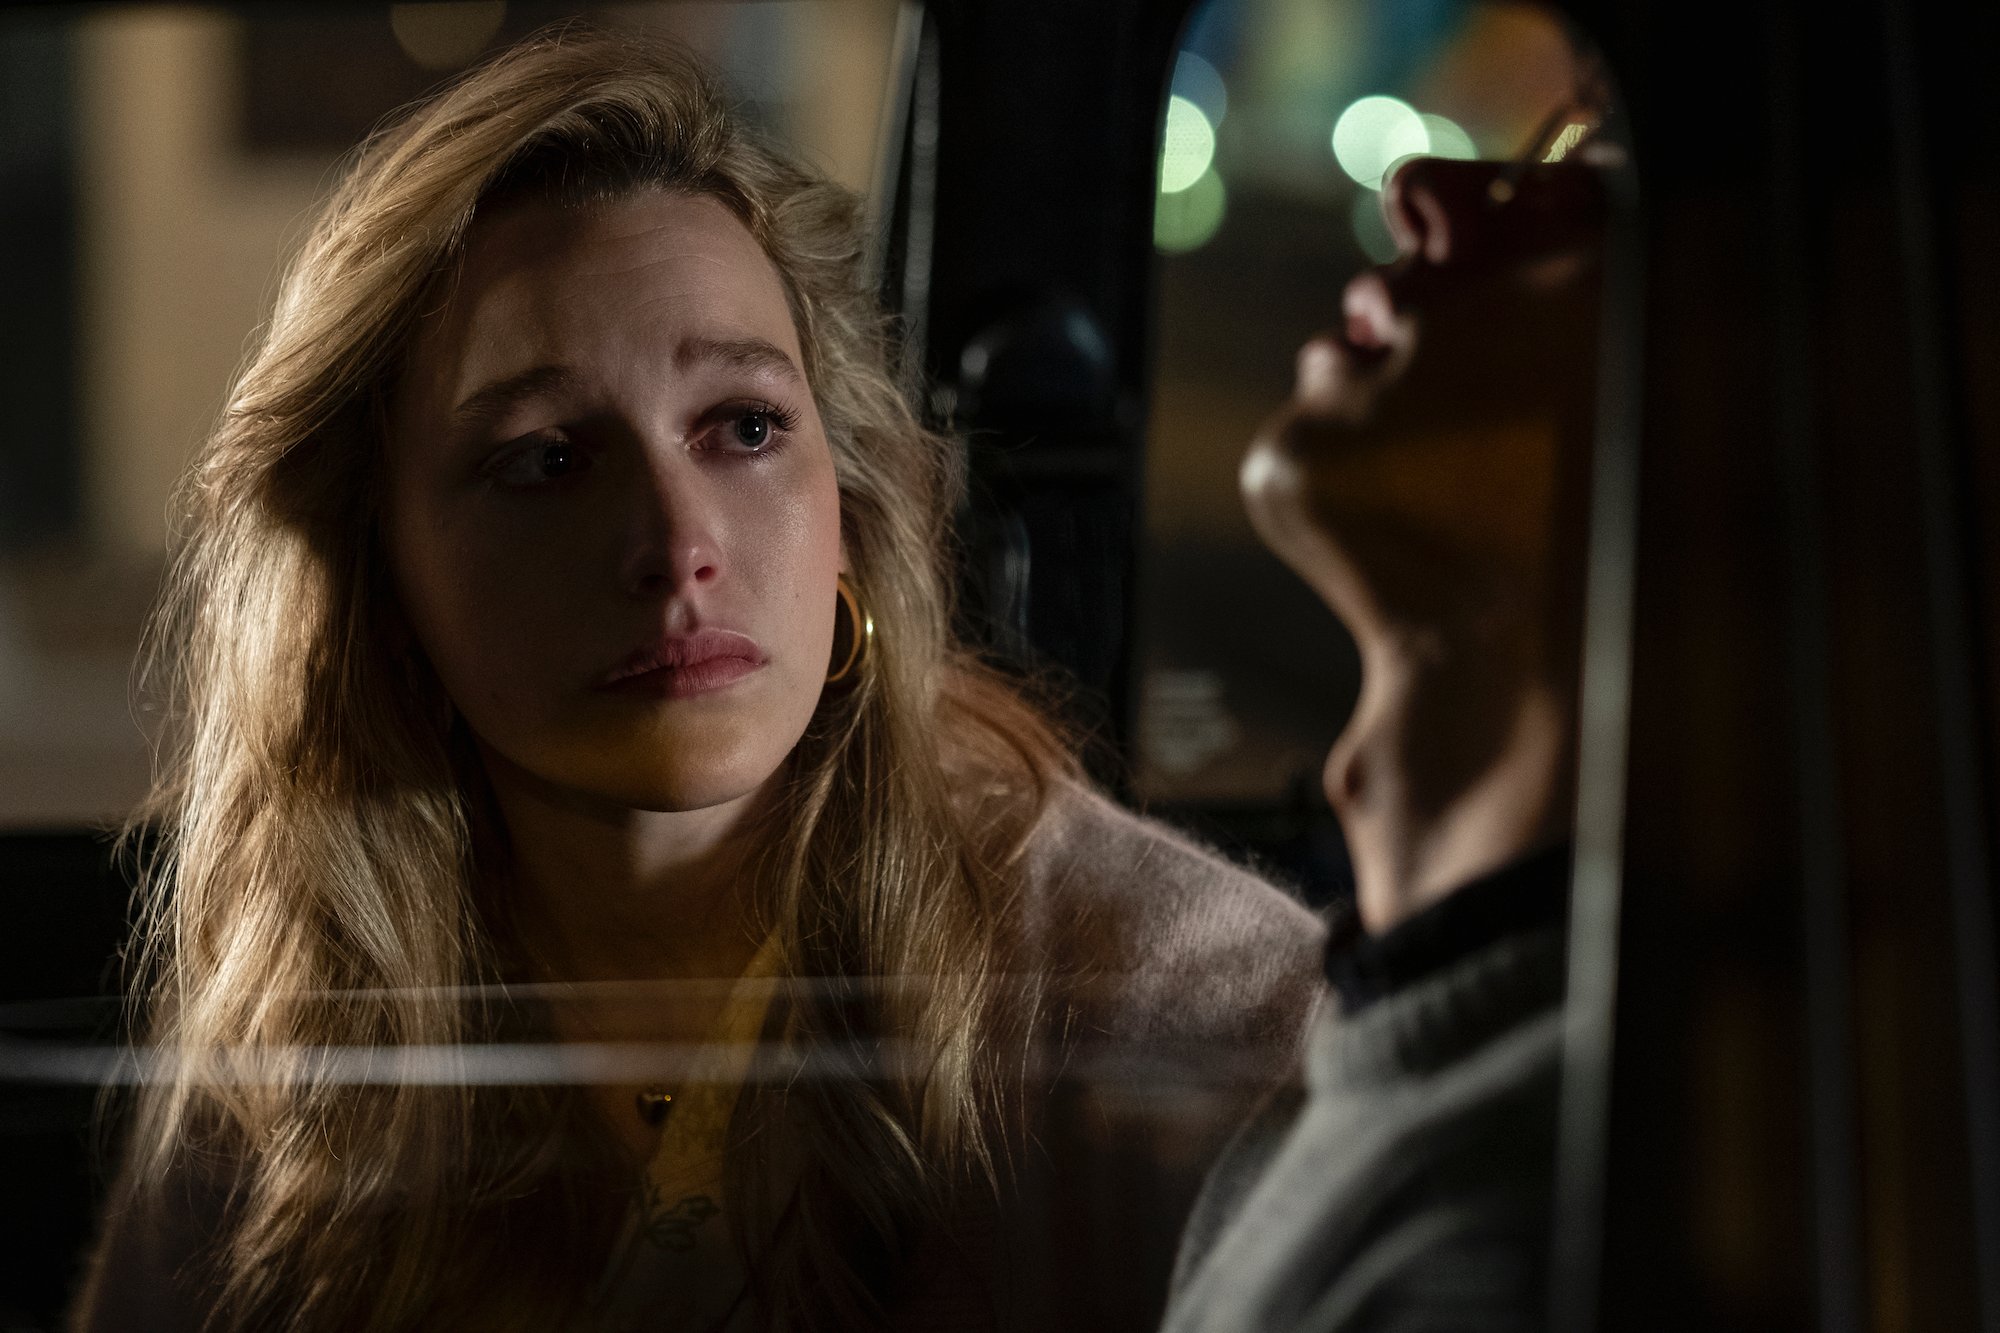 Victoria Pedretti as Dani and Roby Attal as Eddie in 'THE HAUNTING OF BLY MANOR' as she comes out to him in his car.